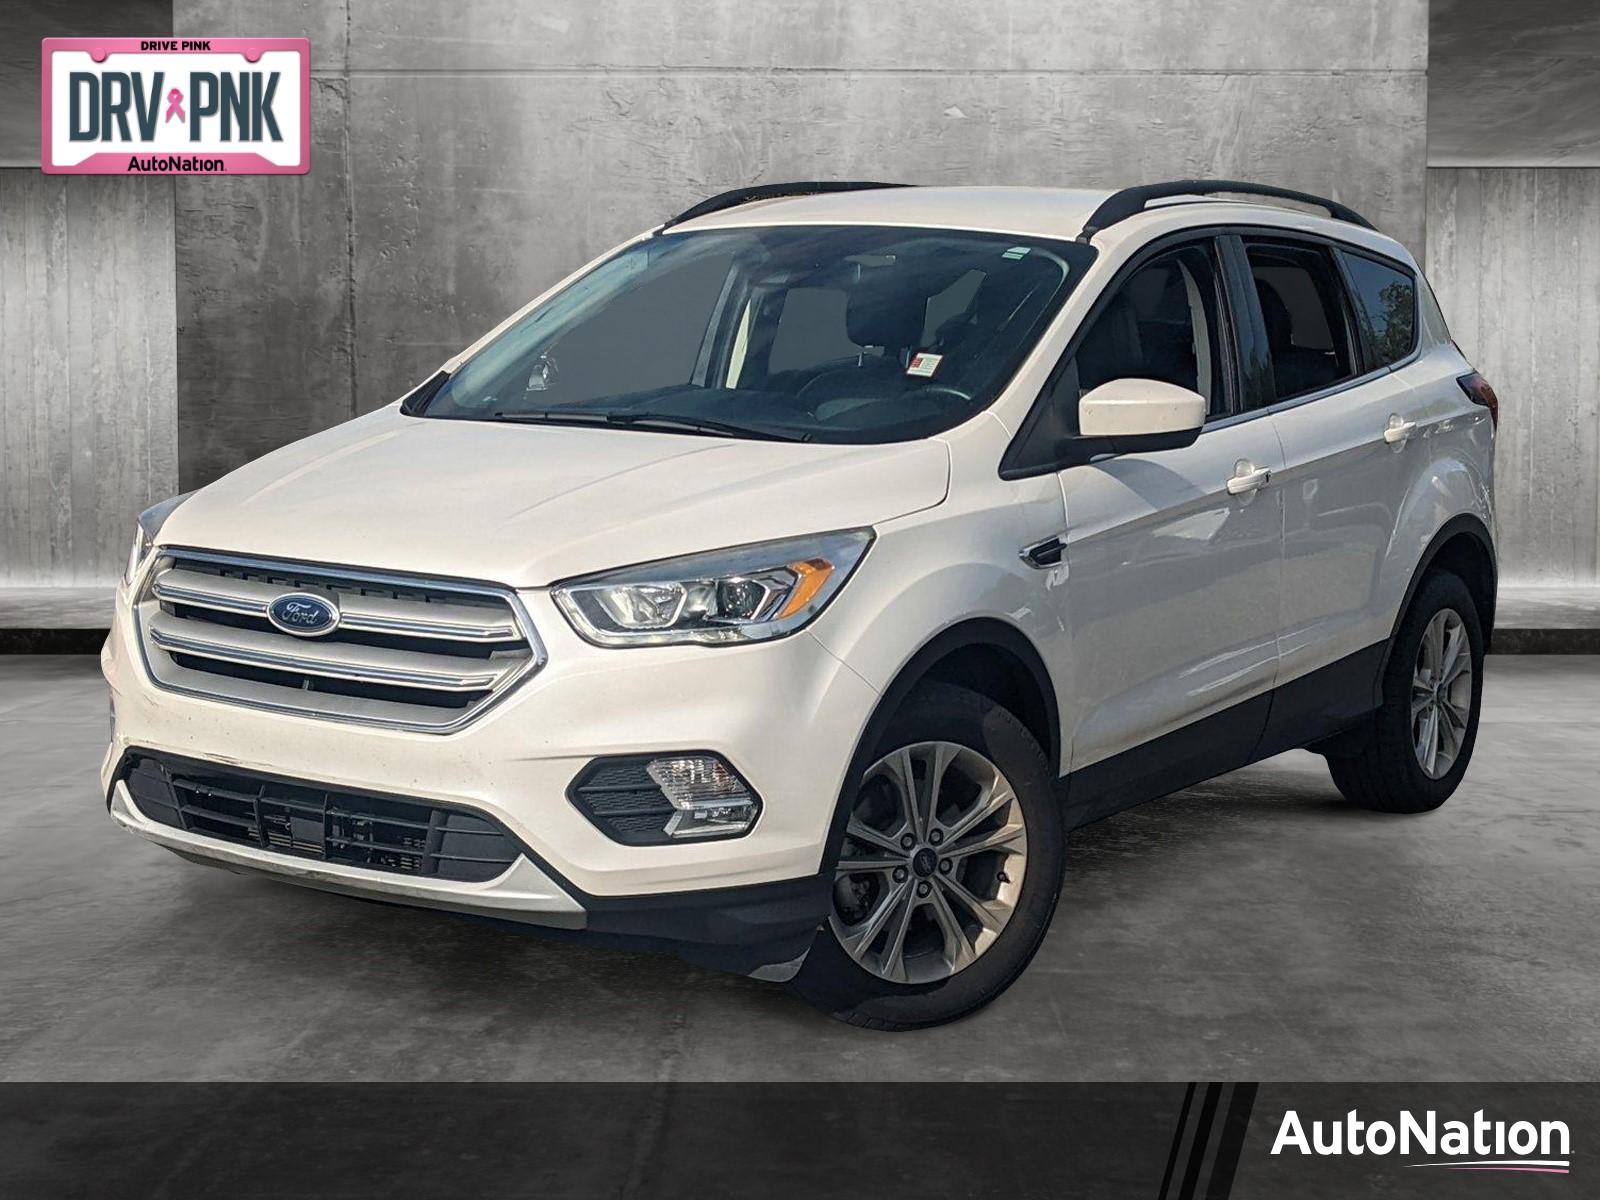 2019 Ford Escape Vehicle Photo in Clearwater, FL 33761